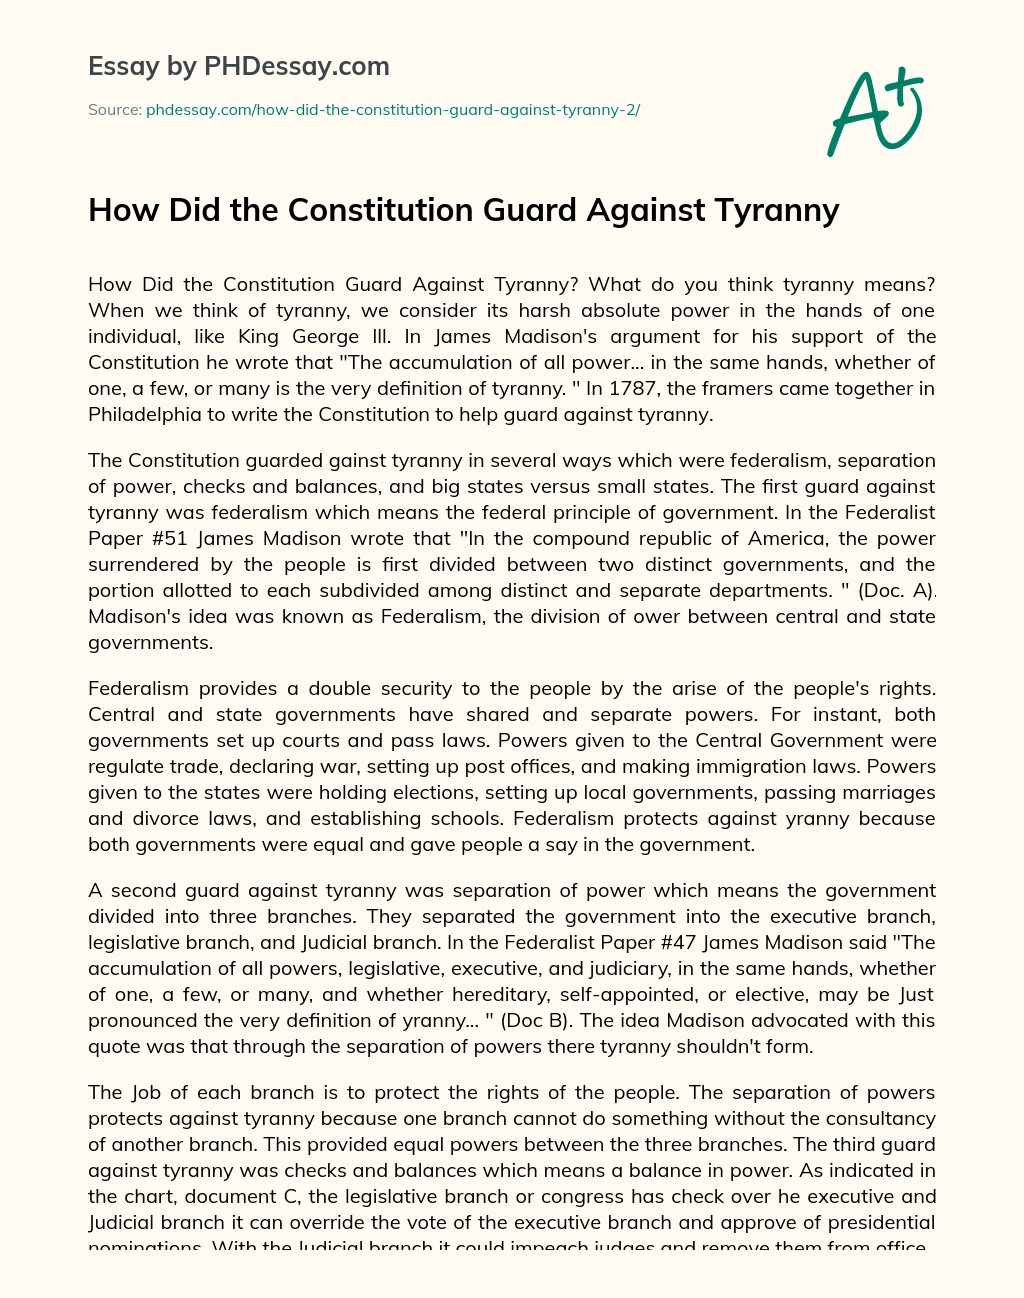 How Did the Constitution Guard Against Tyranny essay